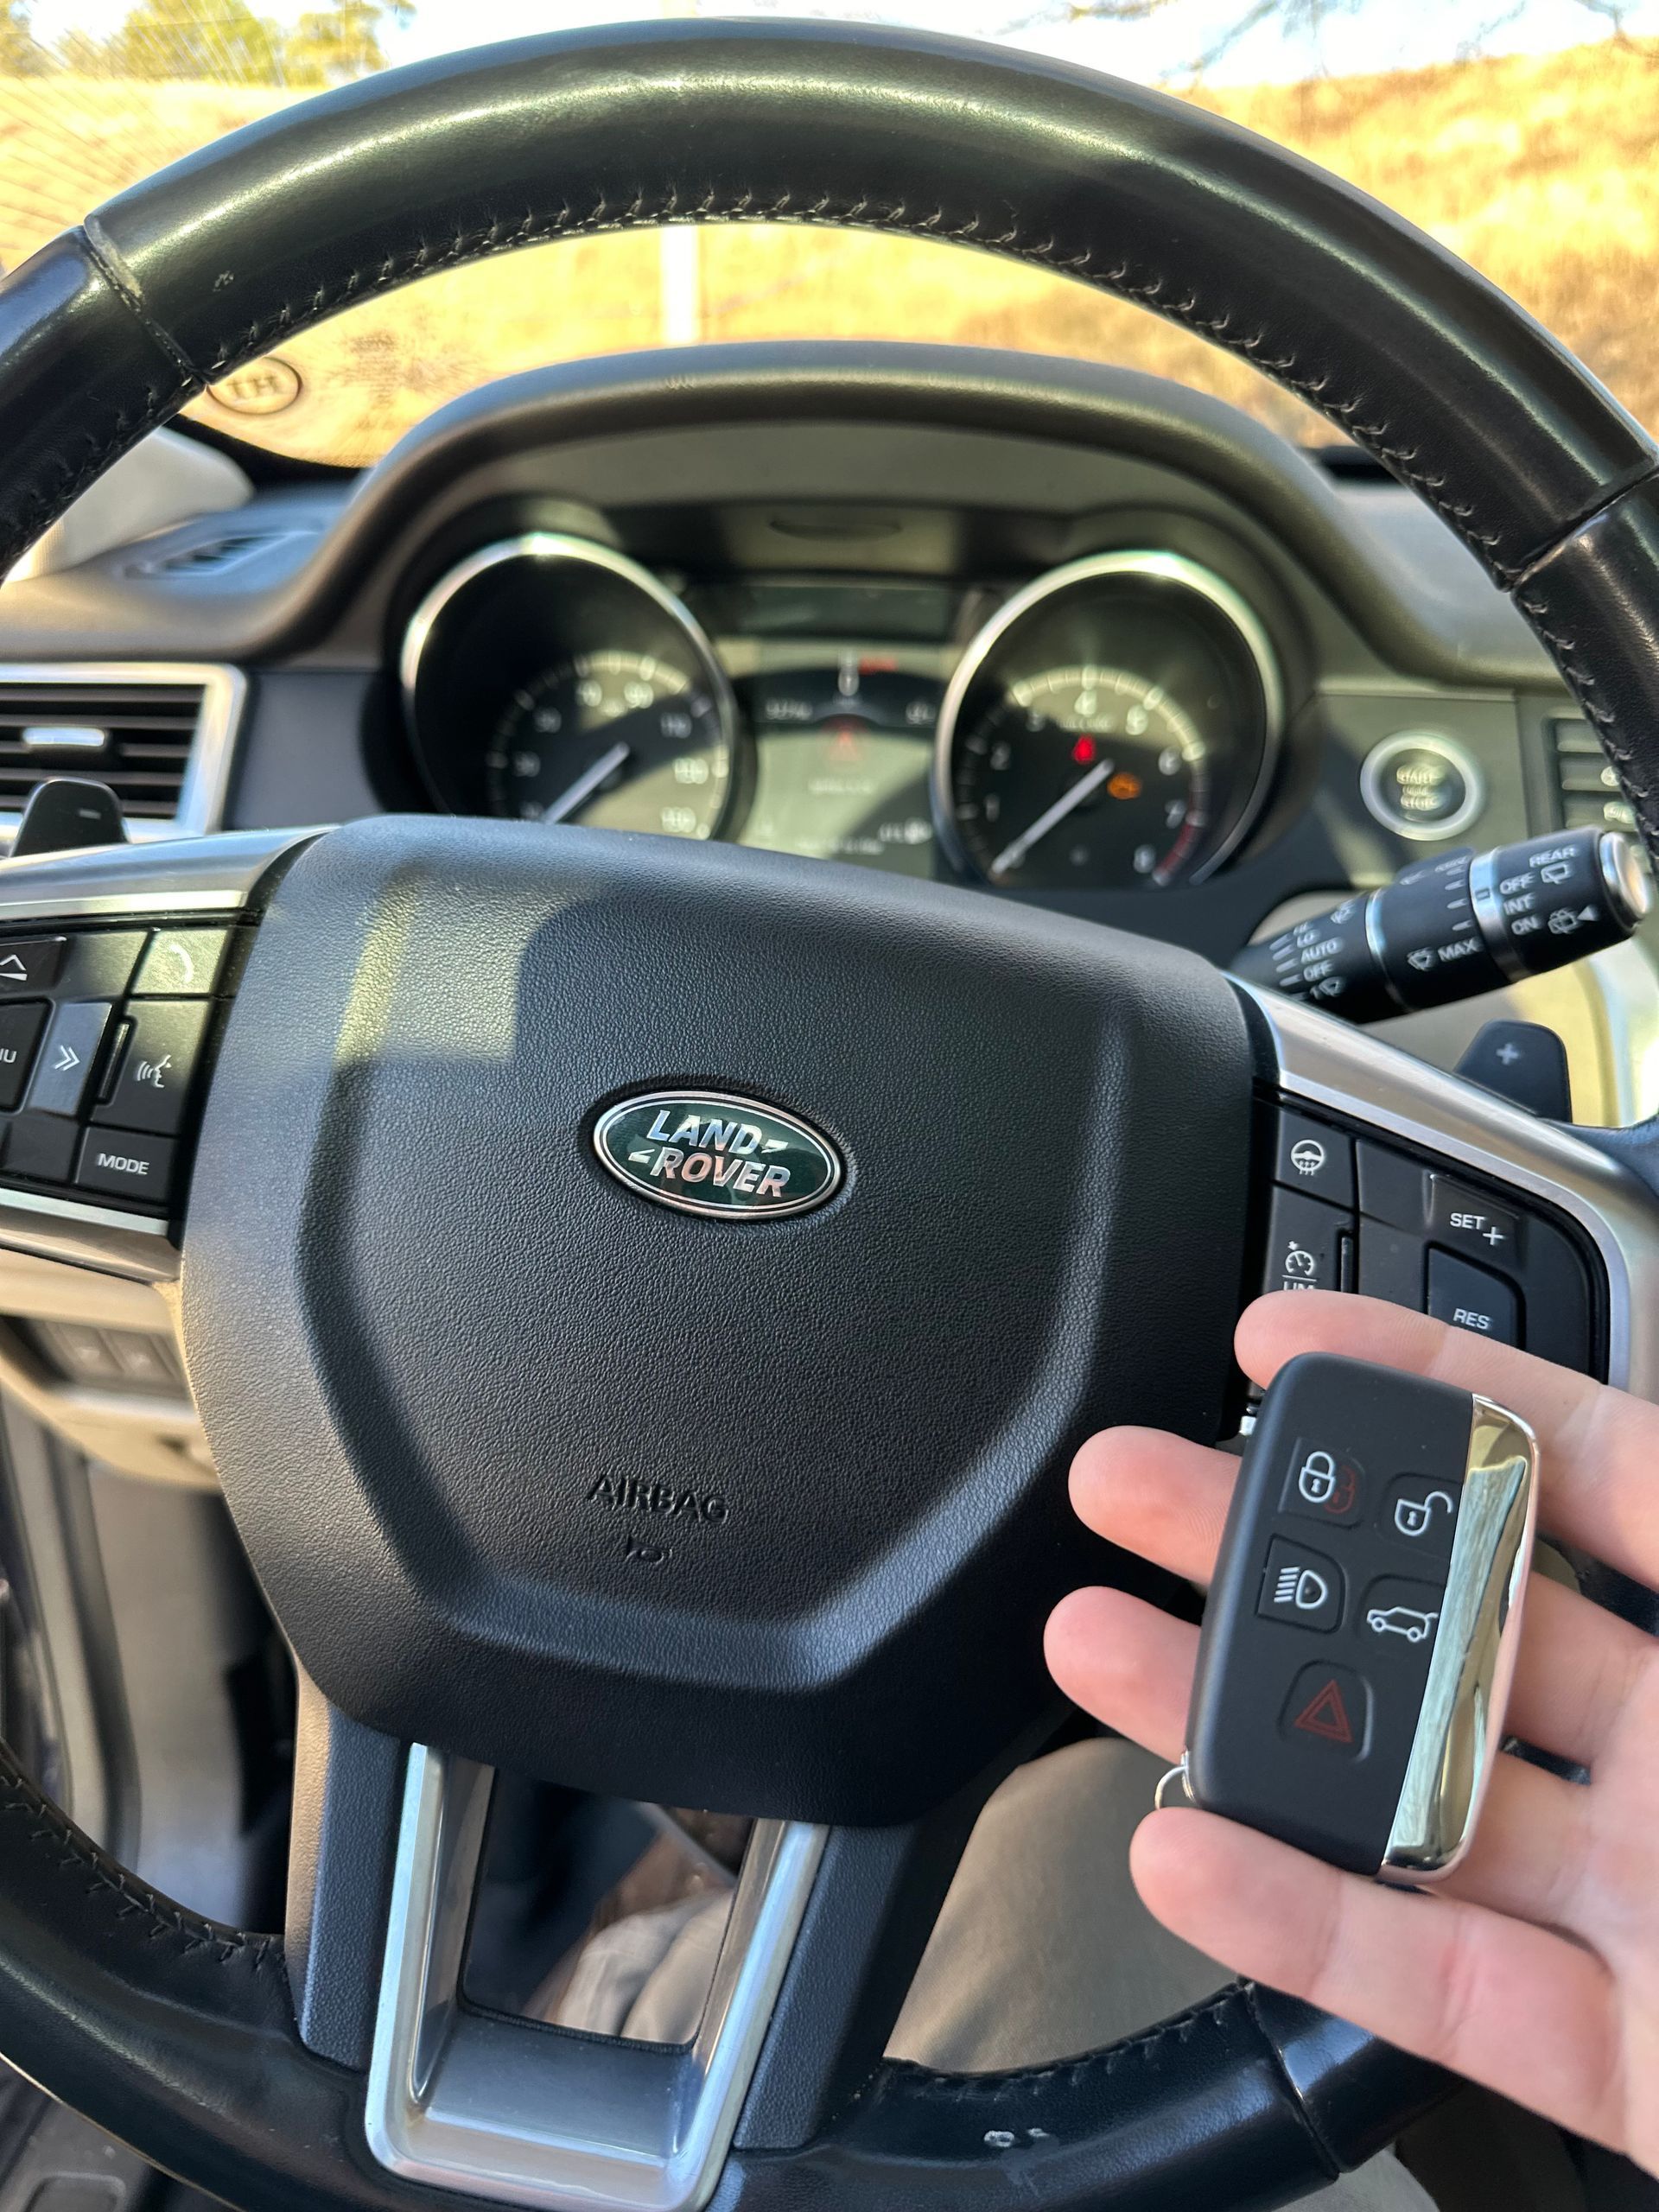 a hand holding a Land Rover vehicle remote in front of a steering wheel